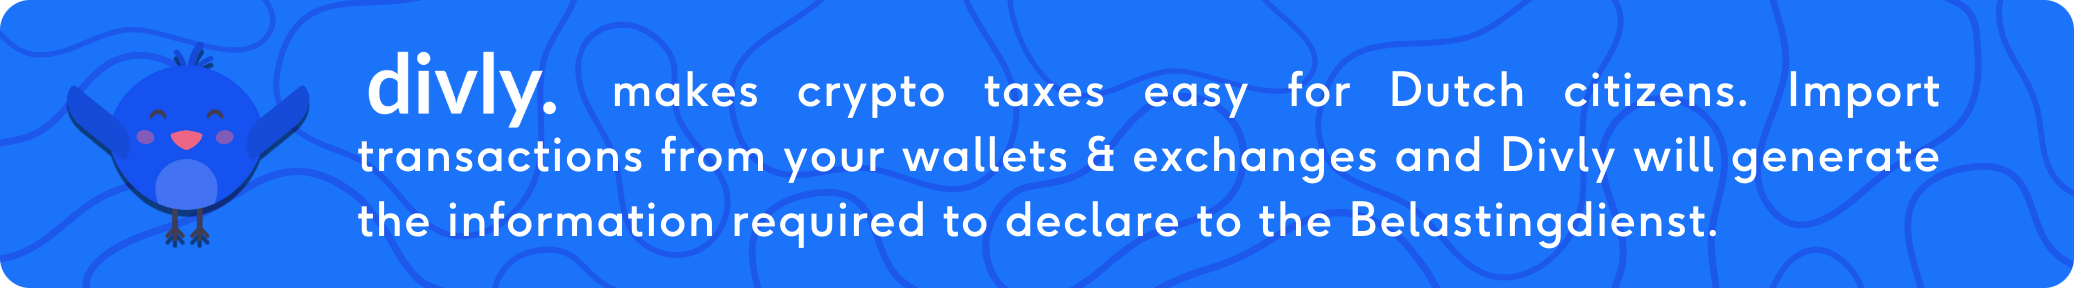 Divly makes crypto taxes easy for Dutch citizens. Import transactions from your wallets & exchanges and Divly will generate the information required to declare to the Belastingdienst